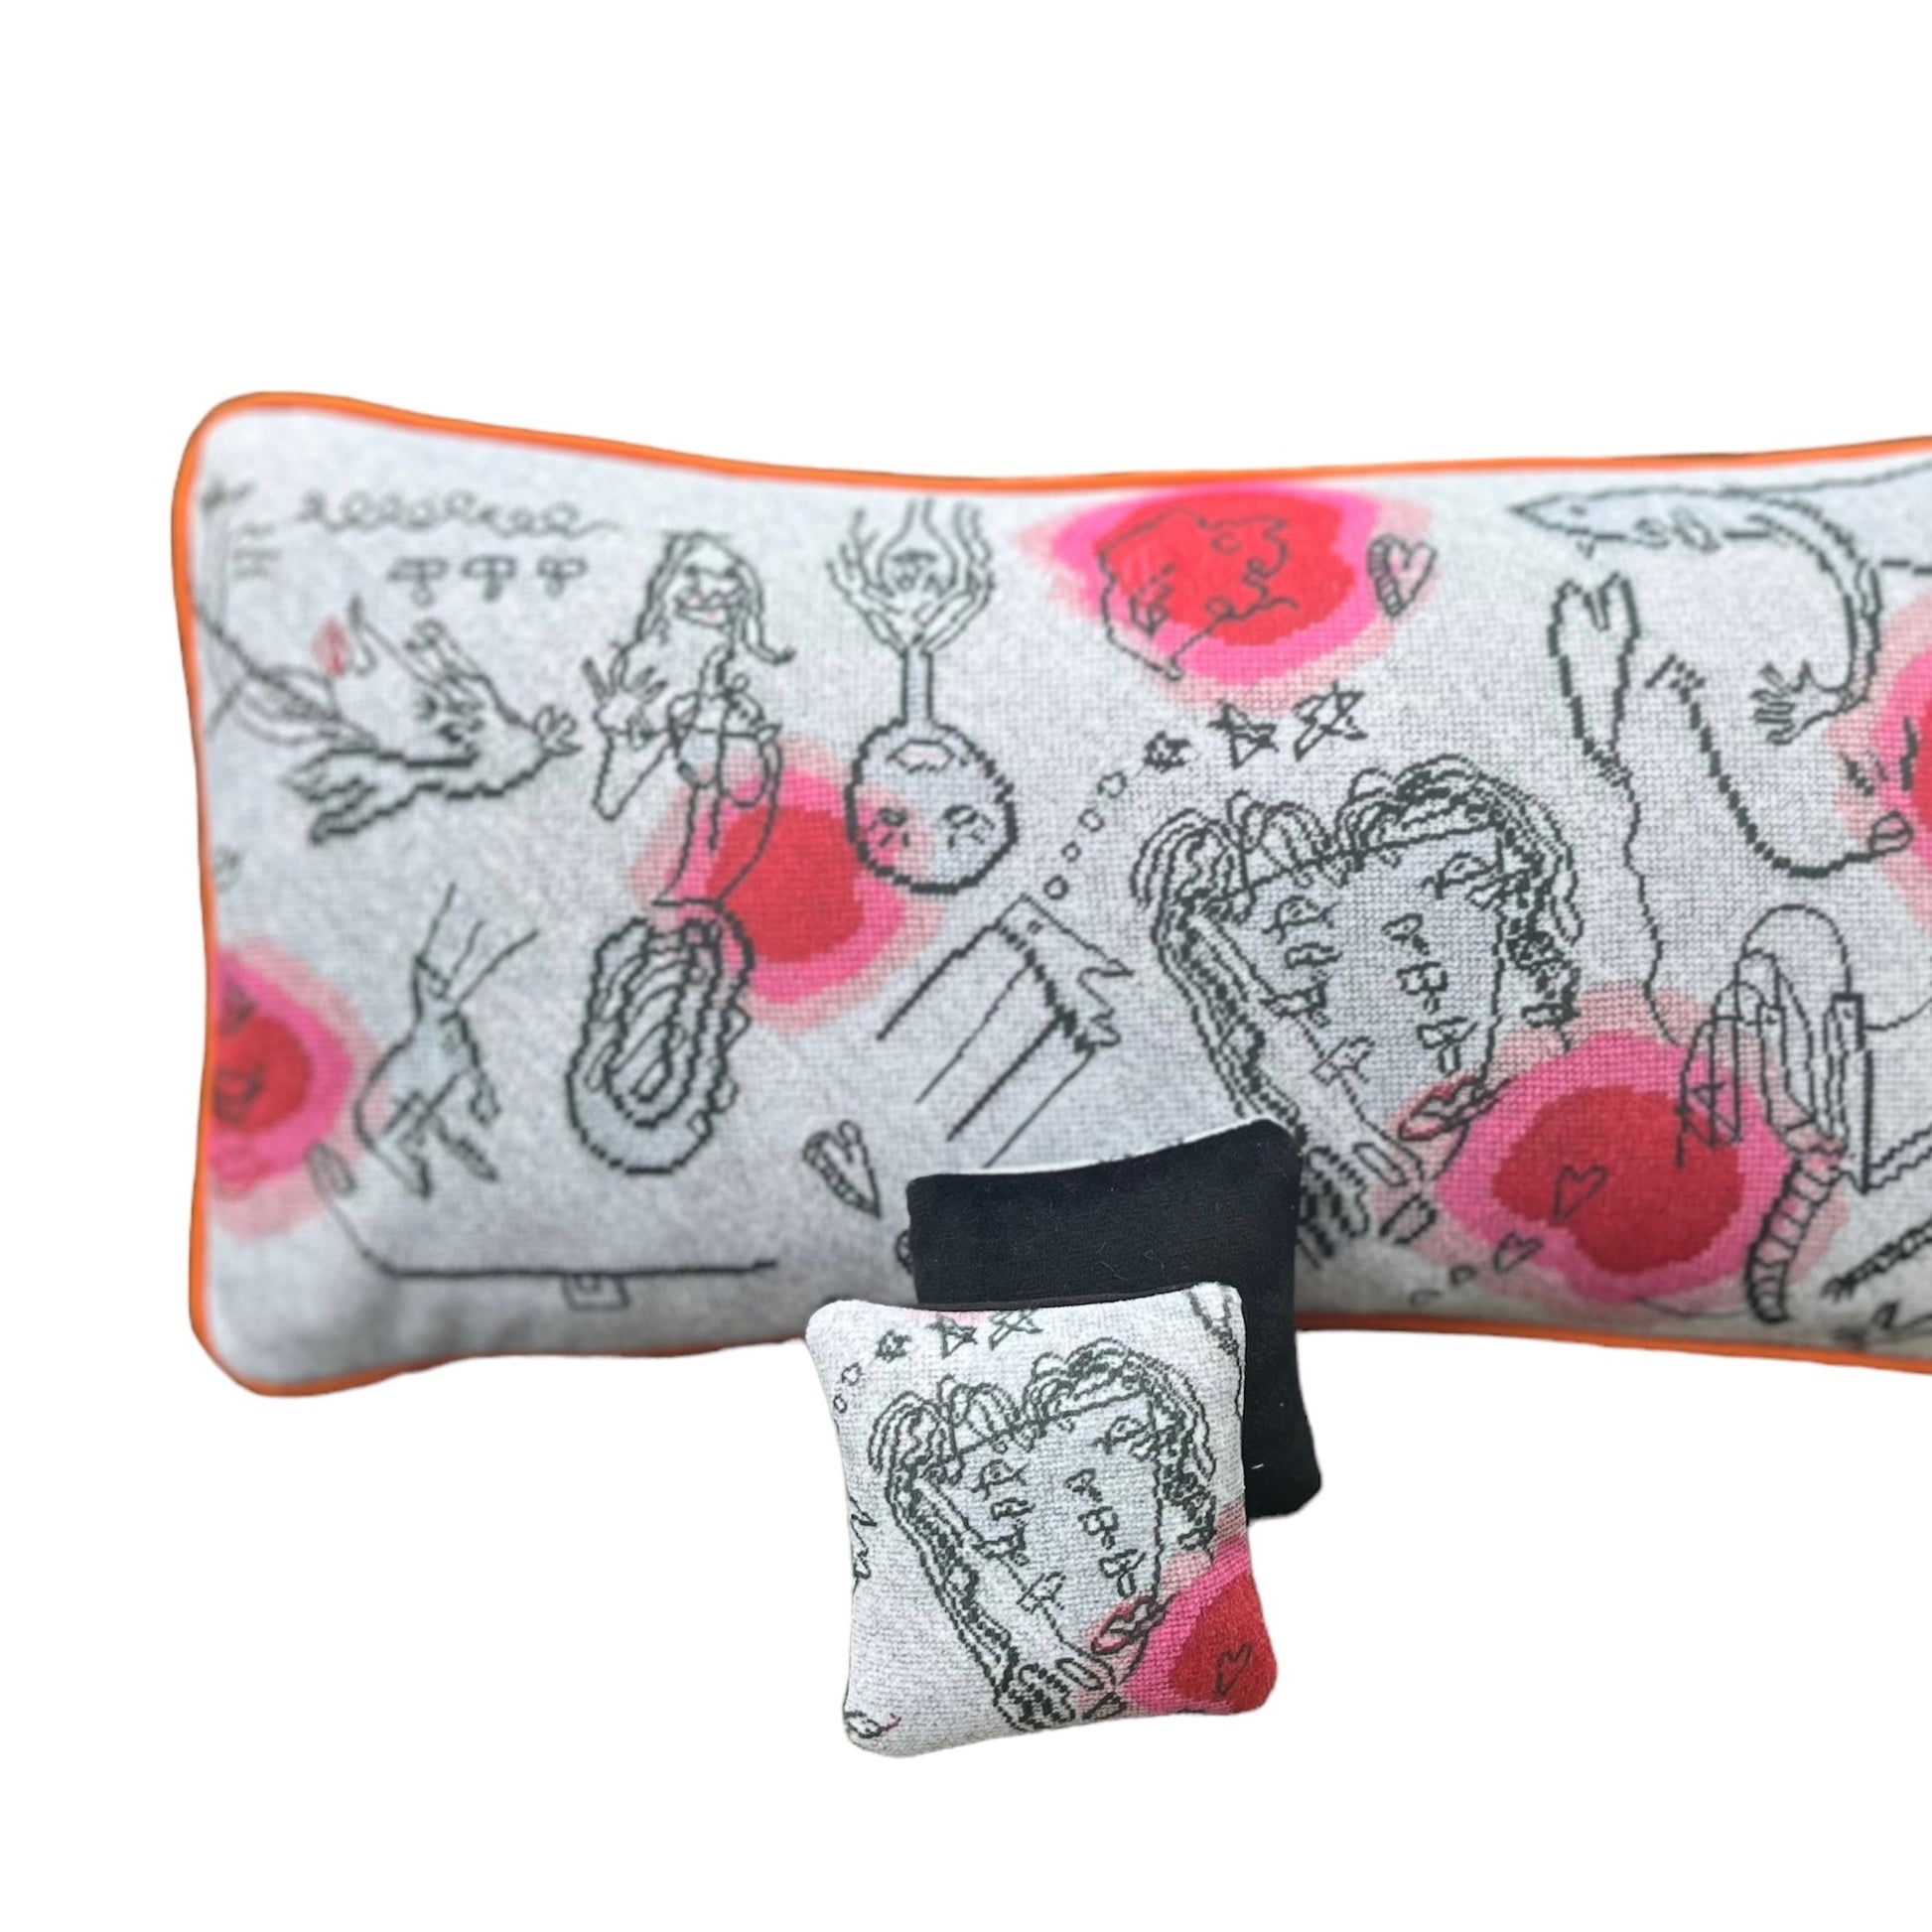 https://mommanithreads.com/products/organic-french-lavender-live-wire-handmade-sachetintricate, eclectic drawings collide on a white background with red and pink blob accents